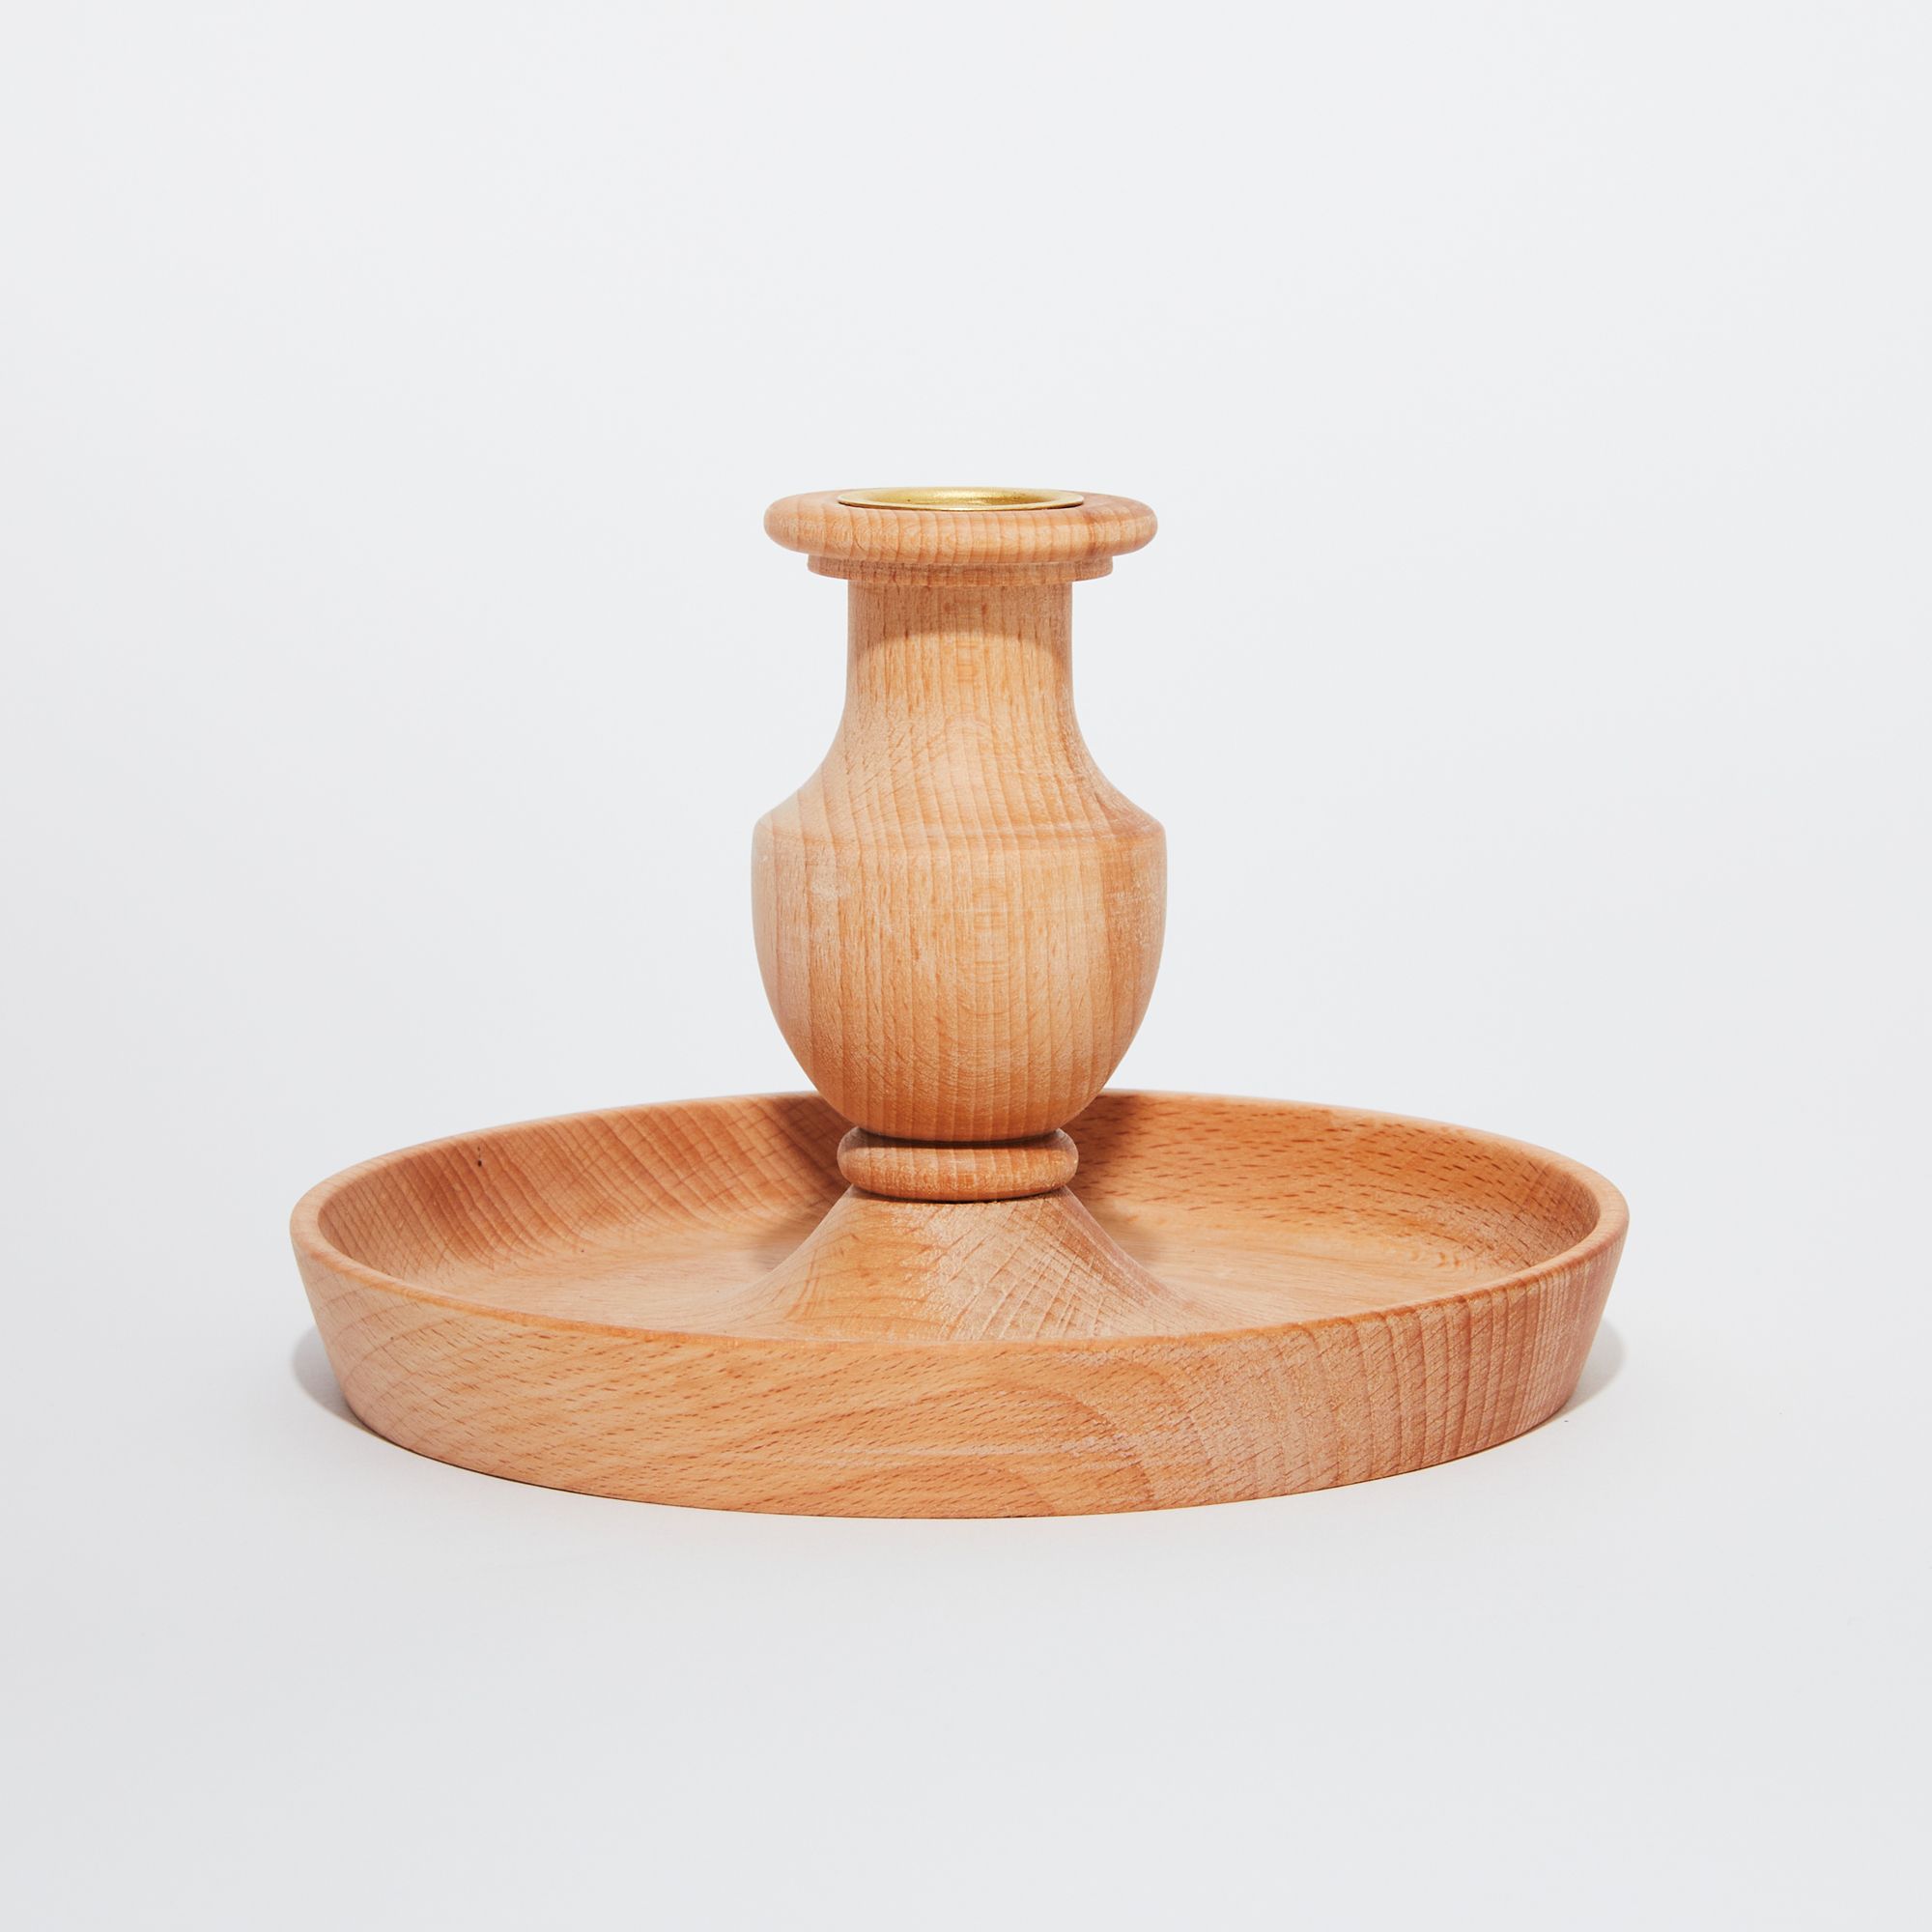 Wooden circular candle holder with tray